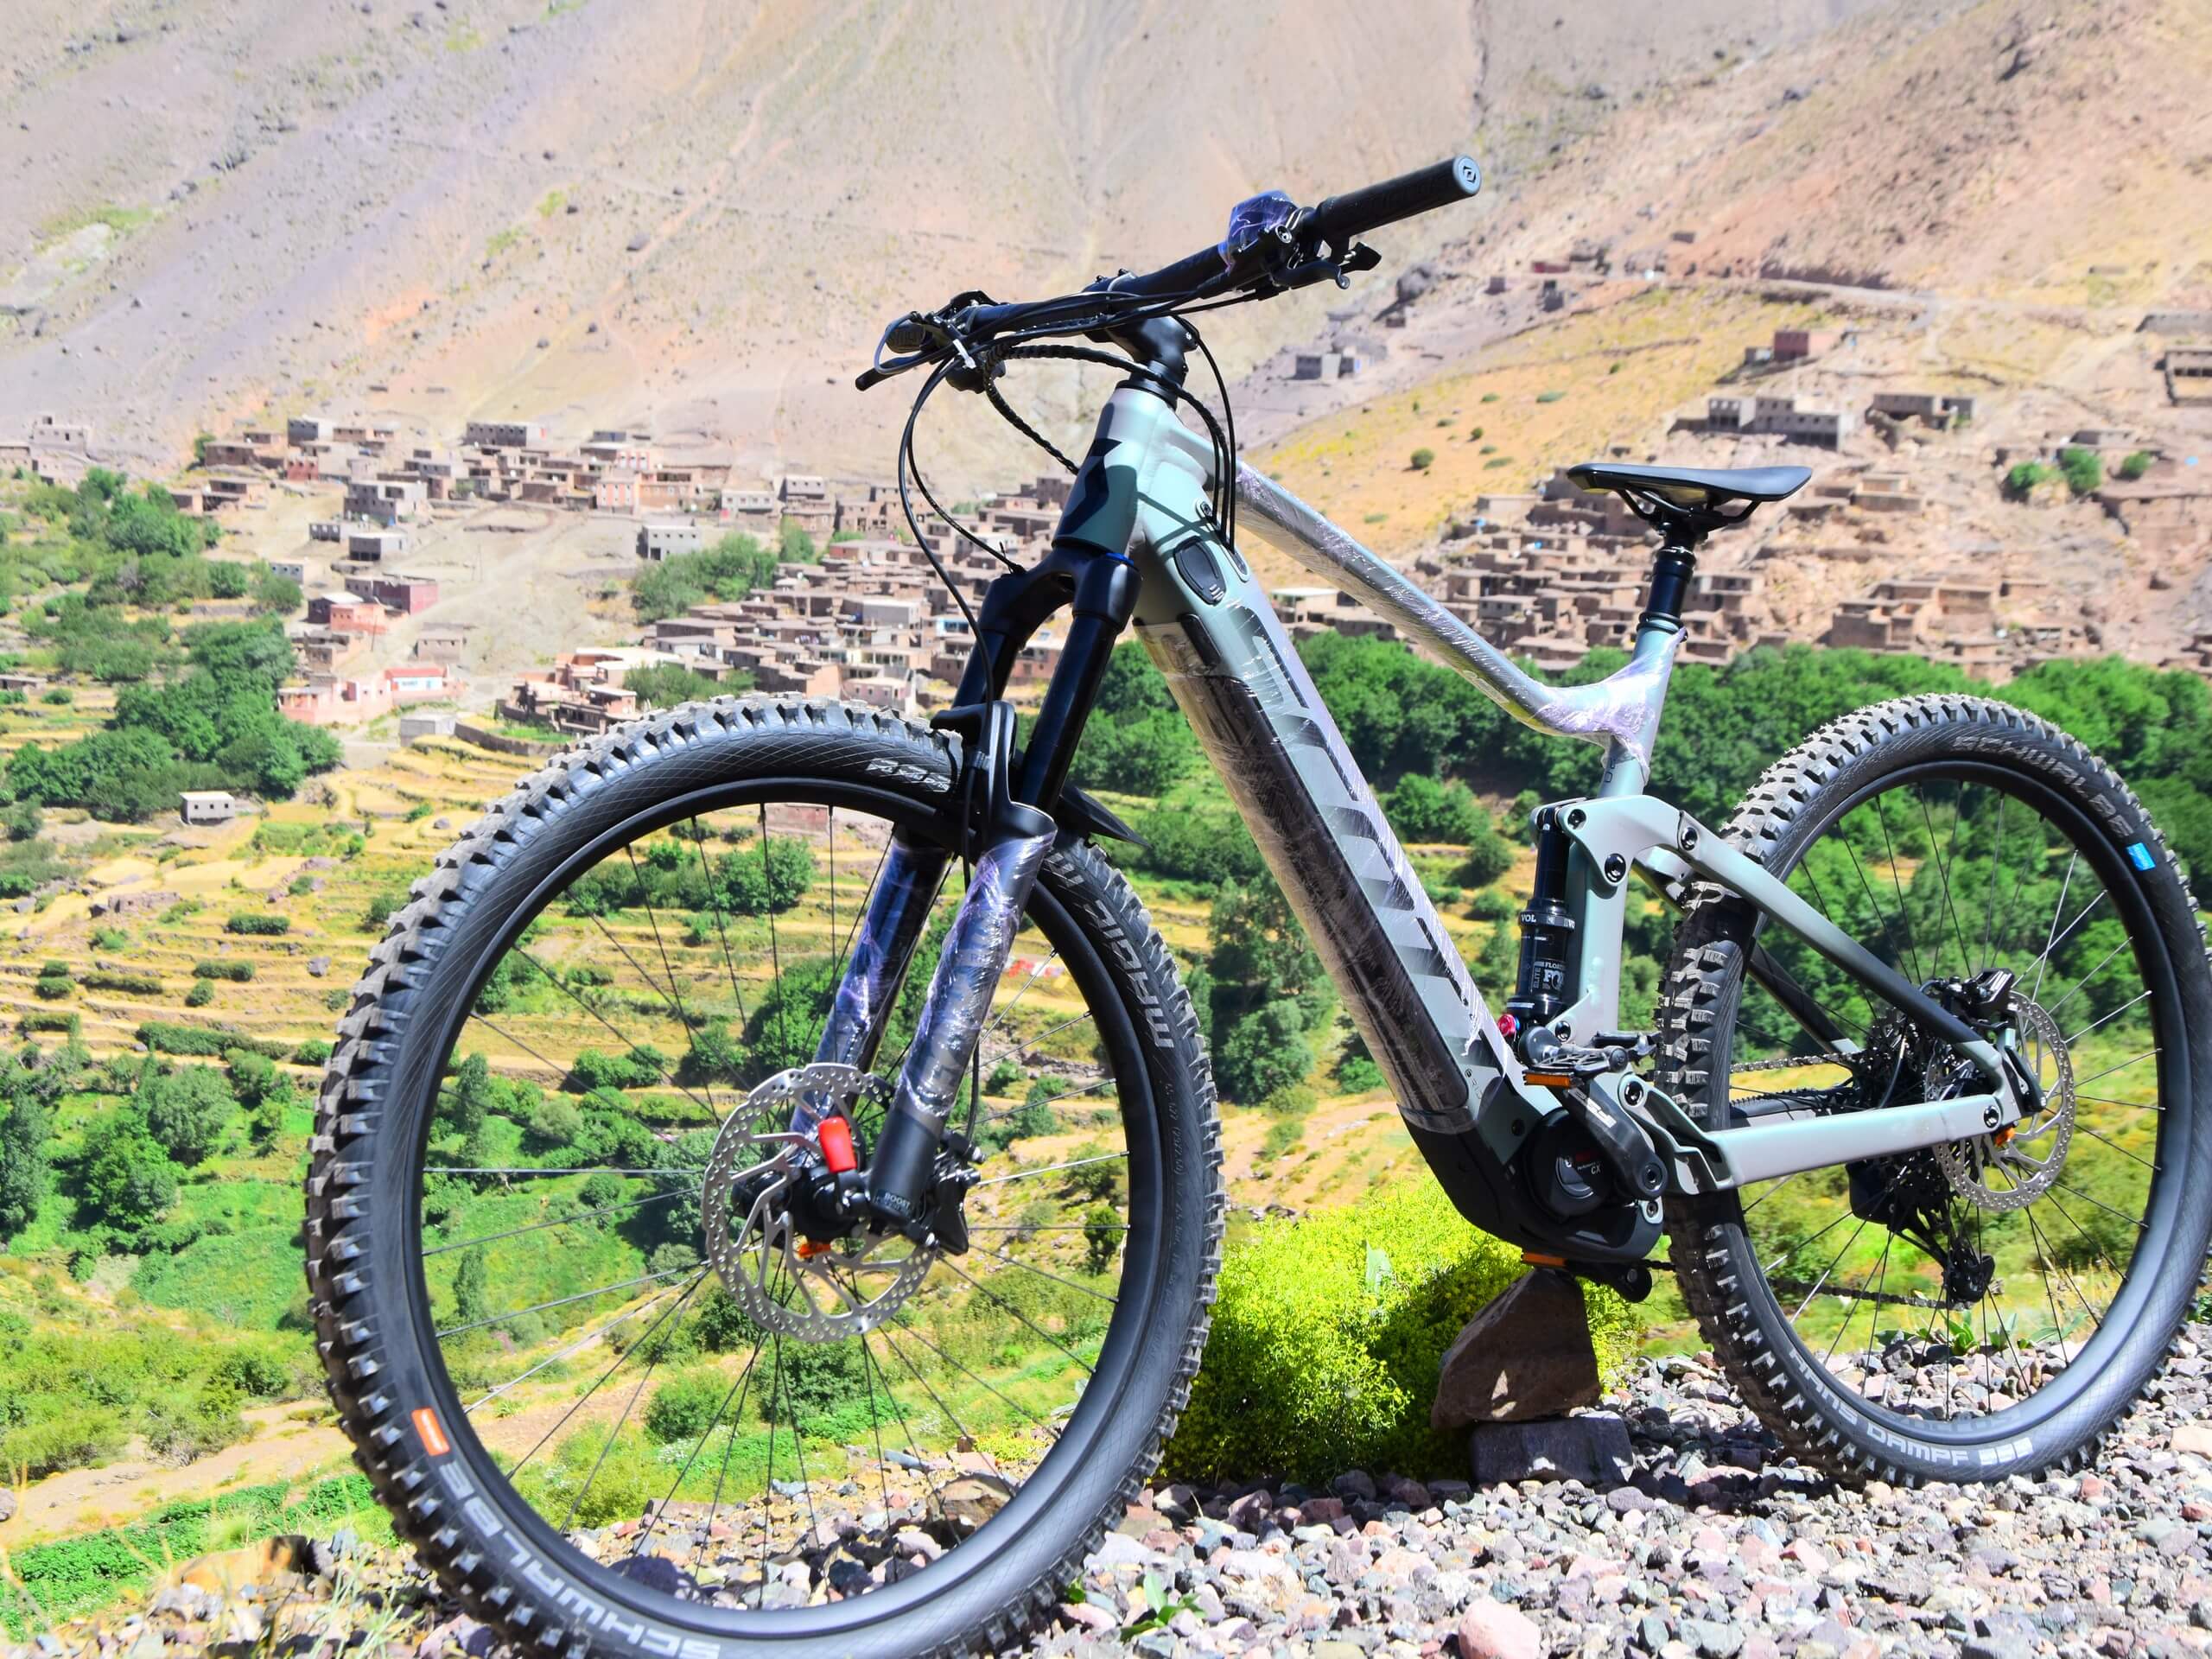 Bike in Moroccan Mountains